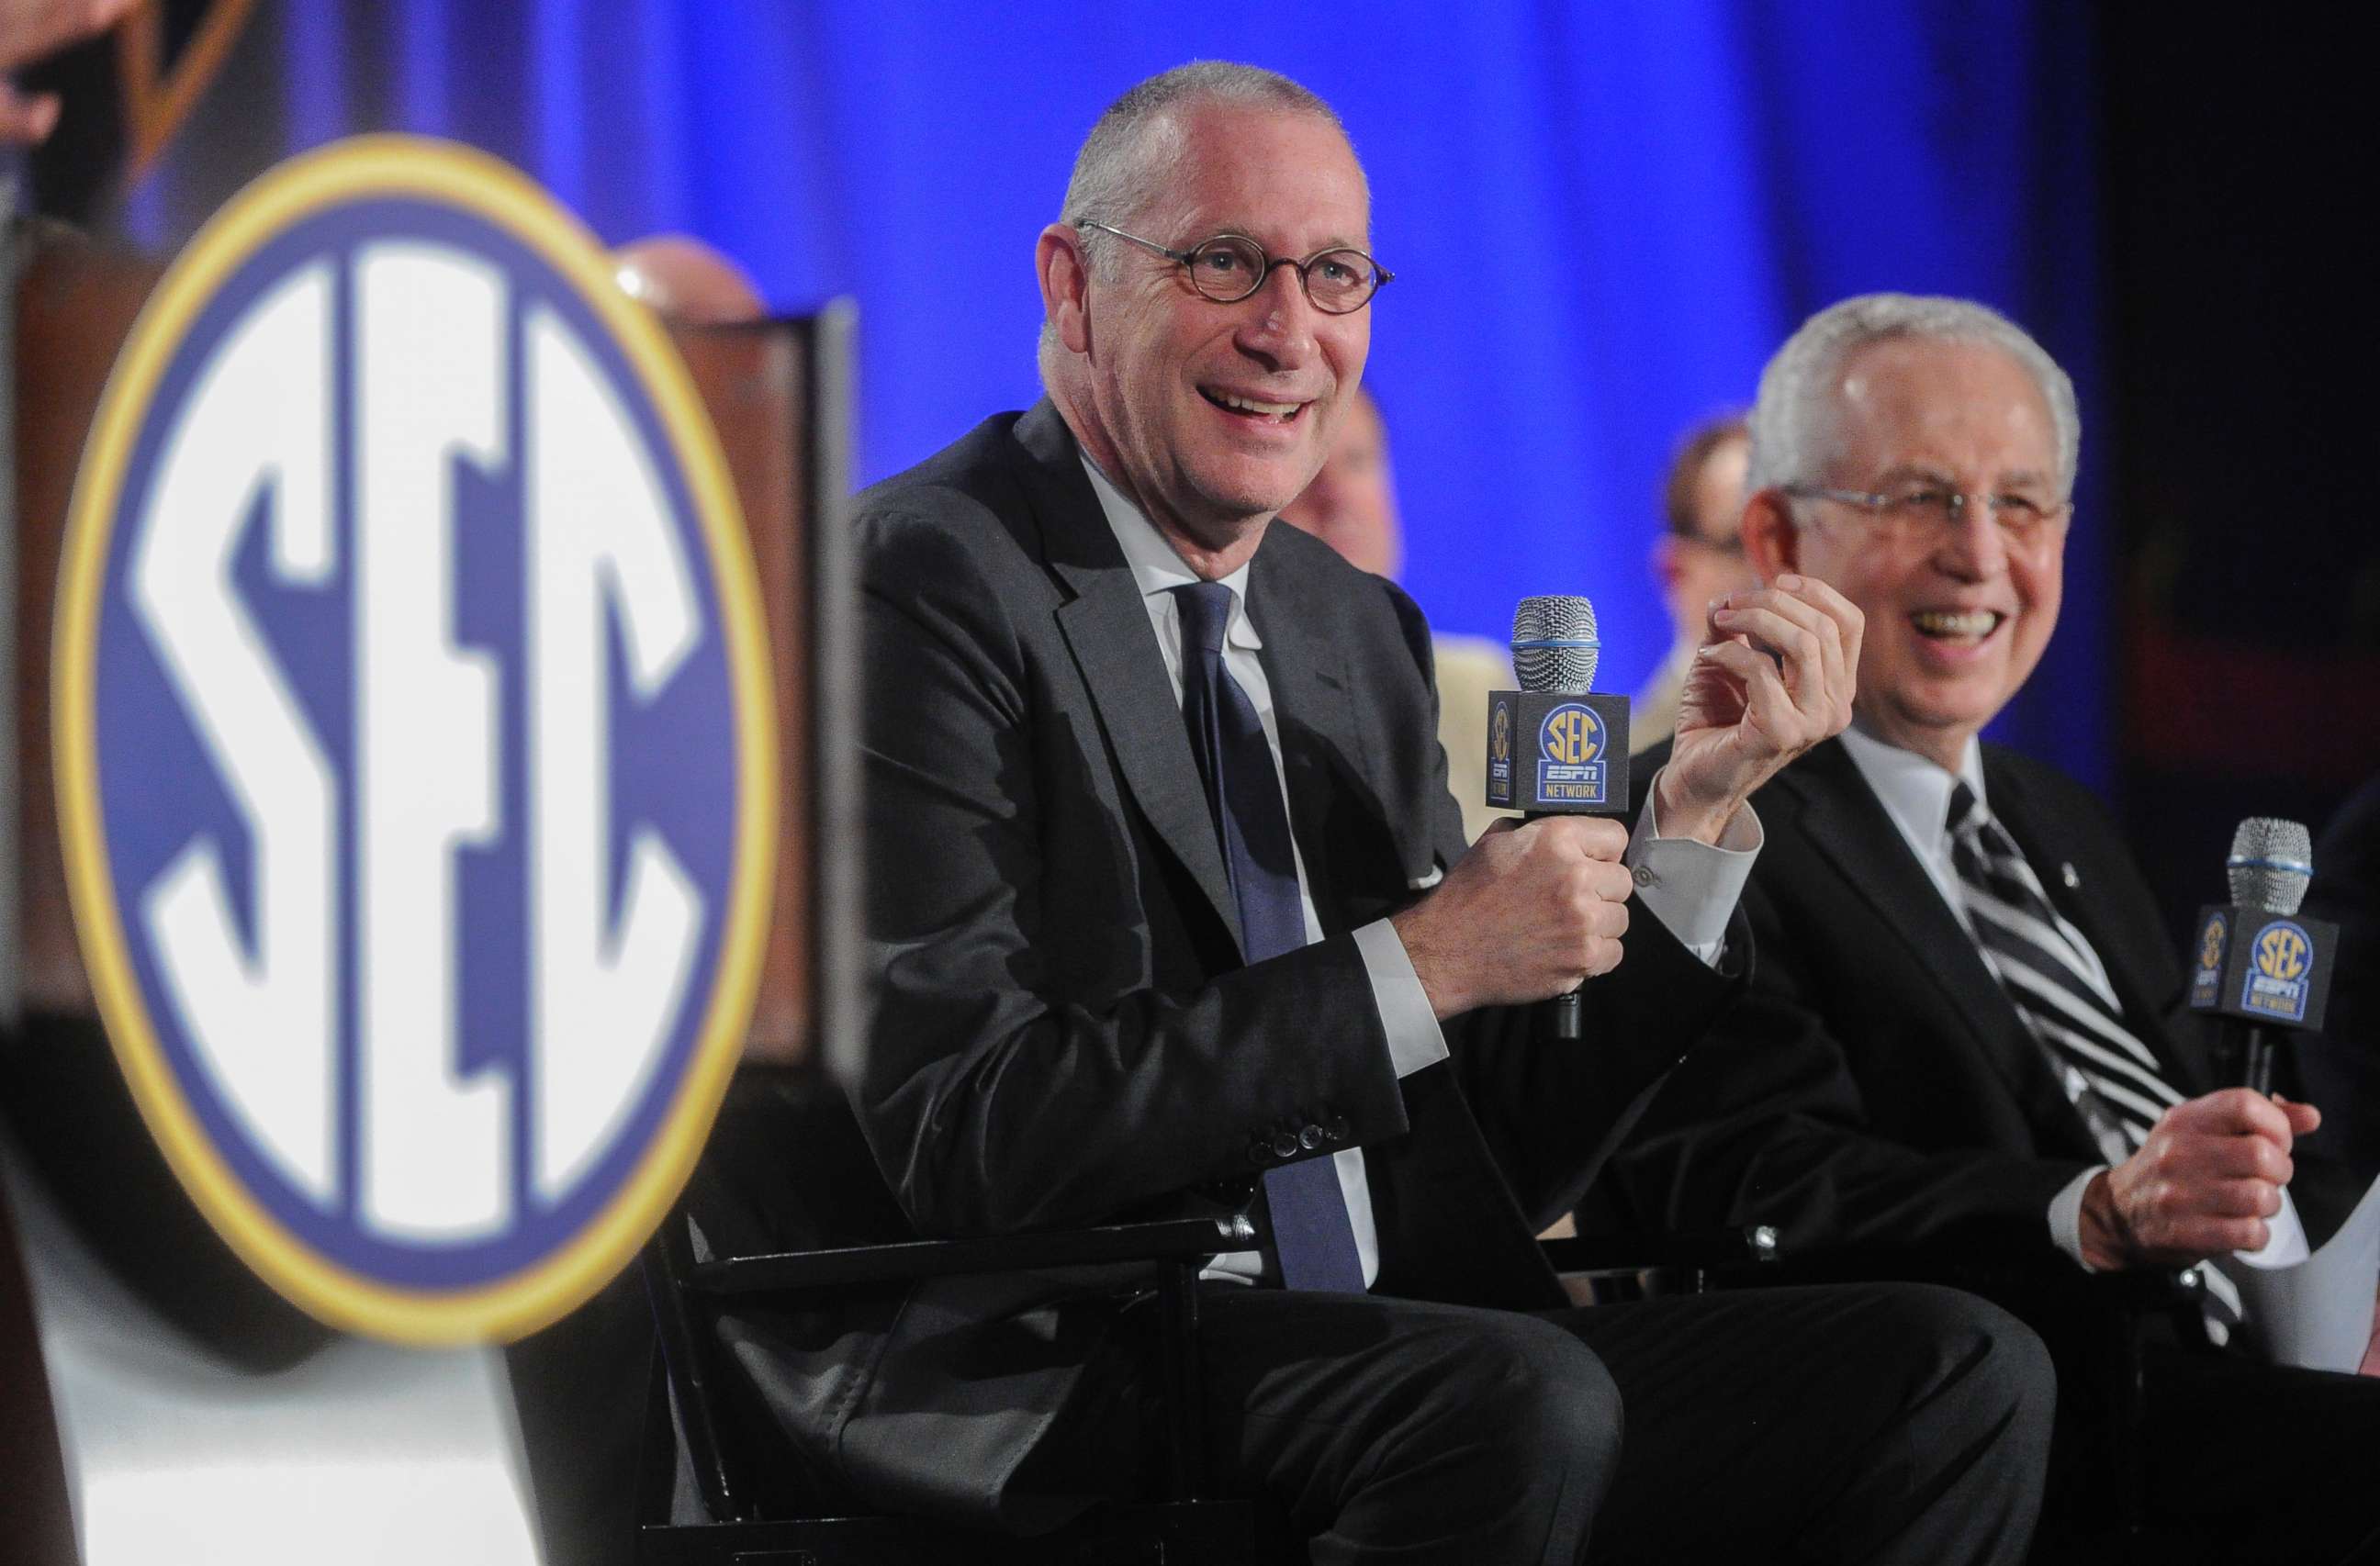 PHOTO: ESPN President John Skipper, left, and Southeastern Conference Commissioner Mike Slive address the media during a news conference announcing the launching of the SEC Network in partnership with ESPN, held May 2, 2013, in Atlanta.